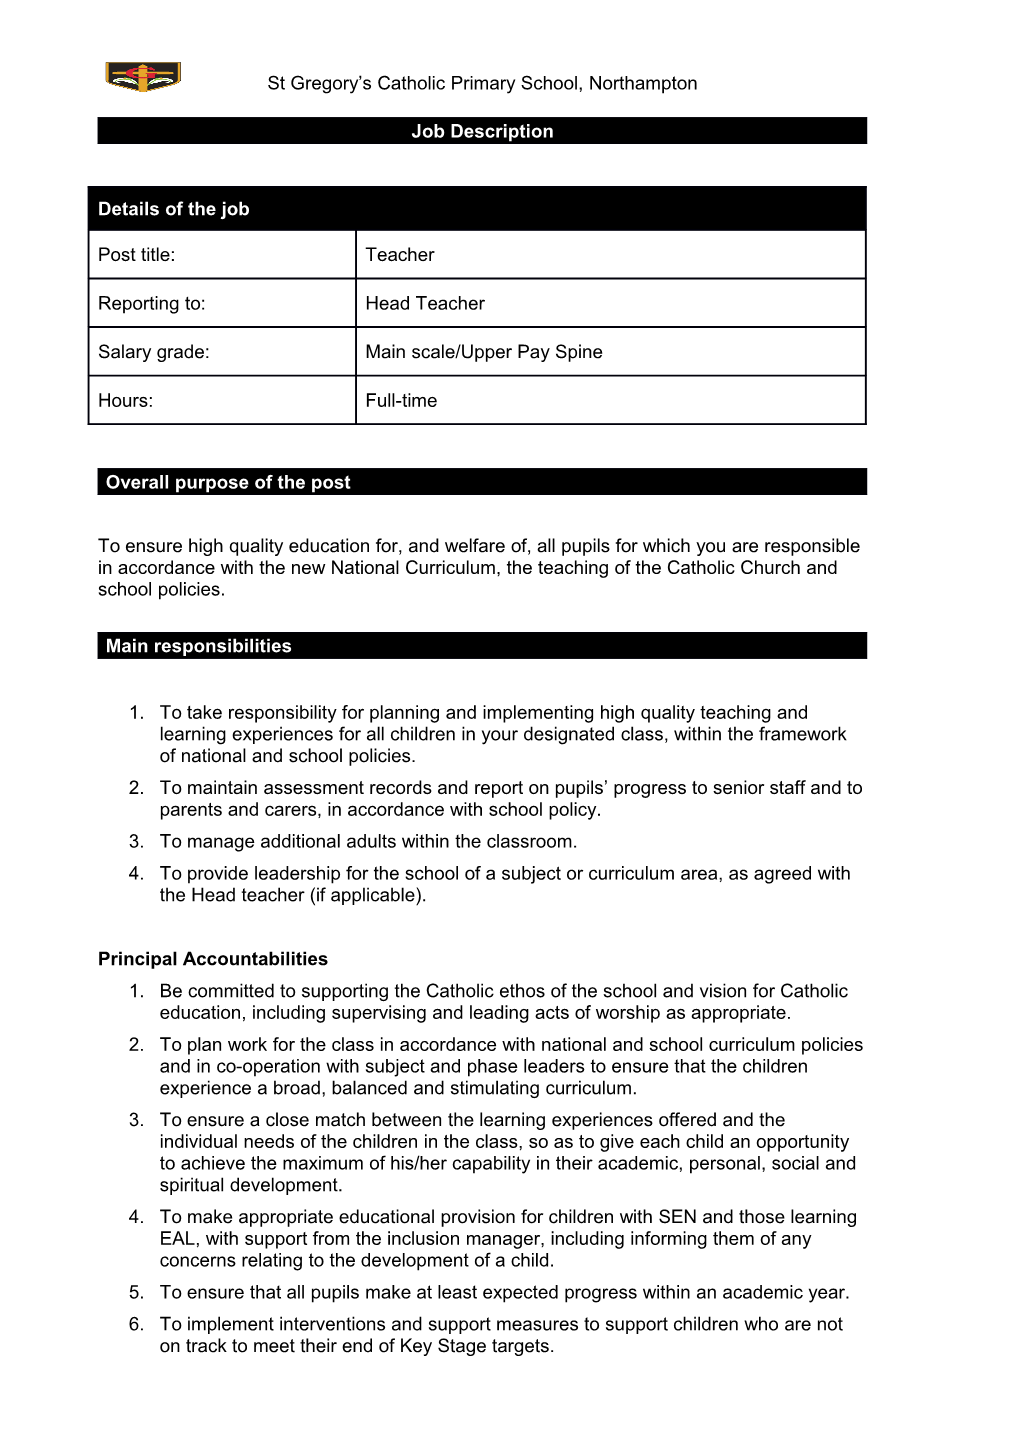 Job Specification for a Subject Leader